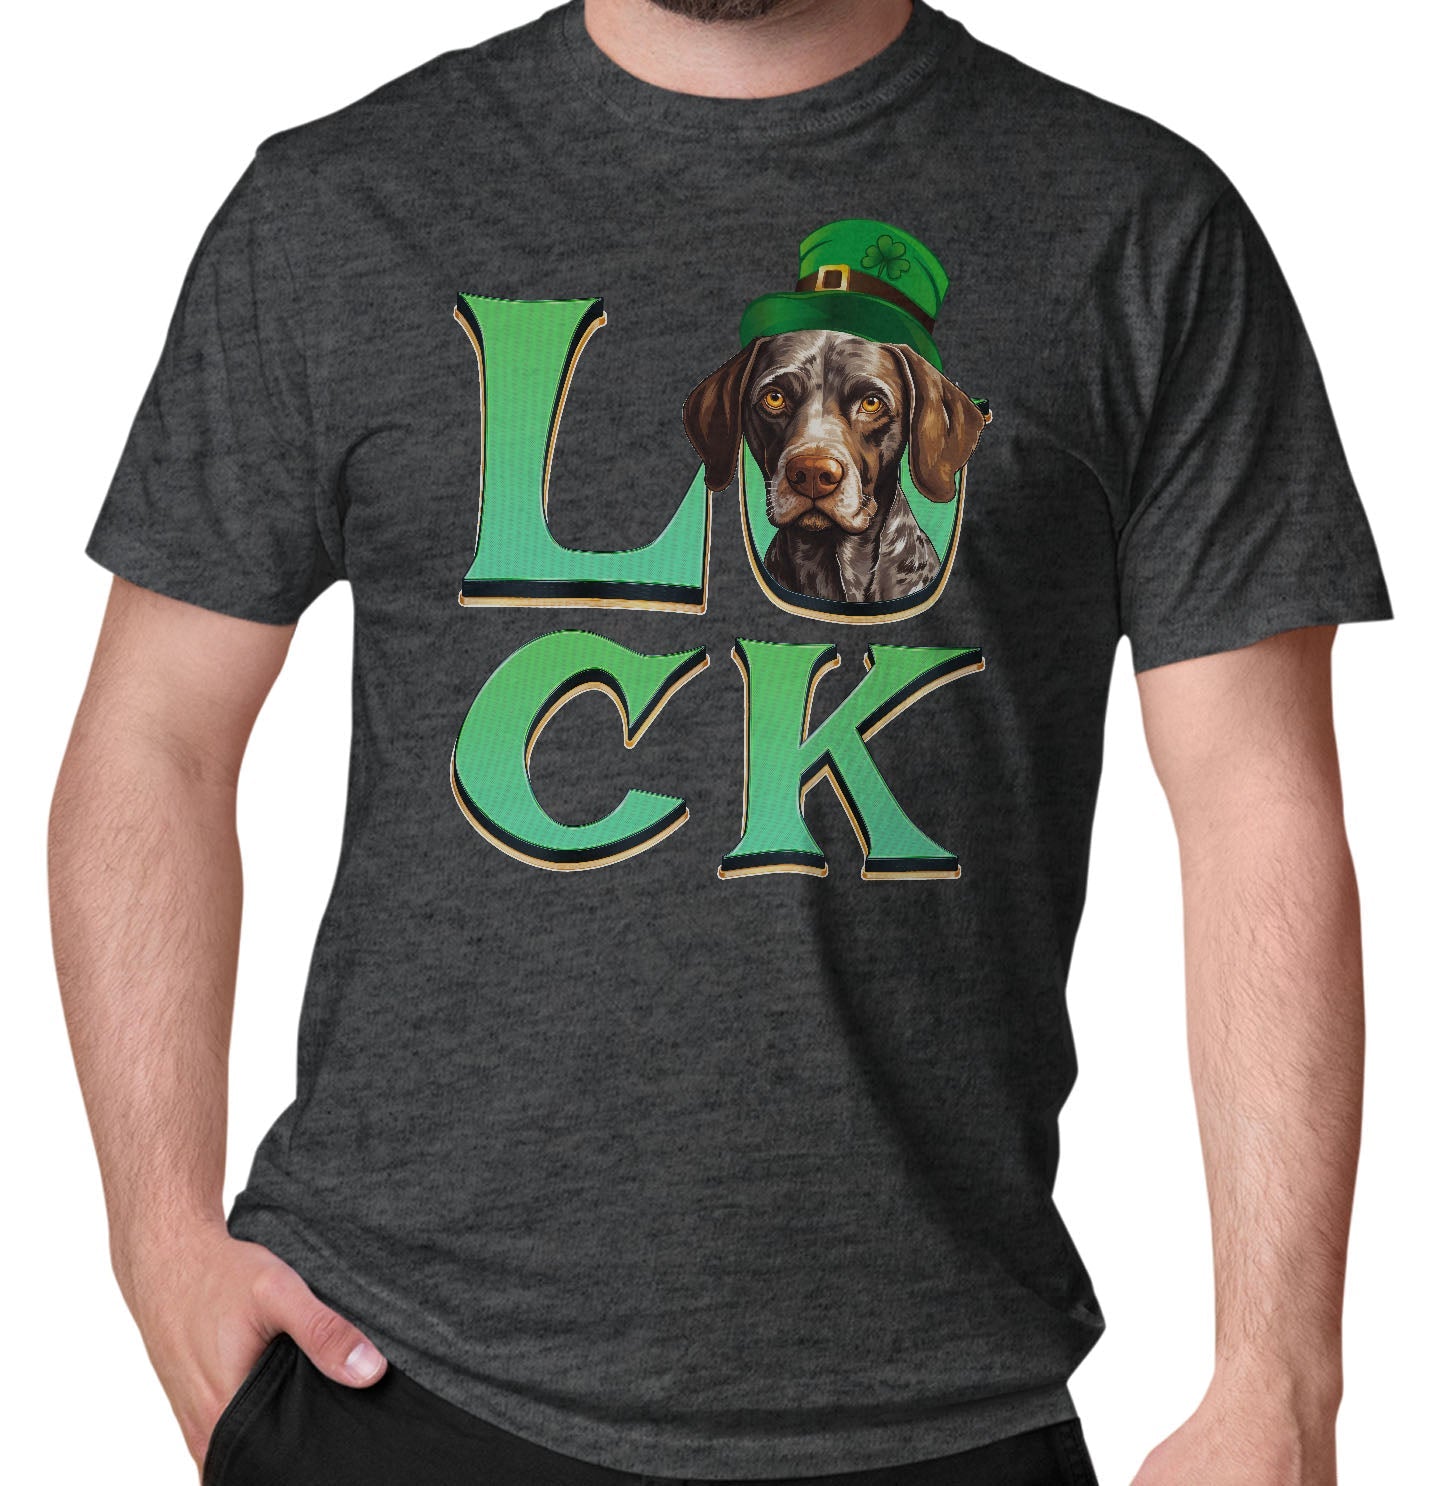 Big LUCK St. Patrick's Day German Shorthaired Pointer - Adult Unisex T-Shirt